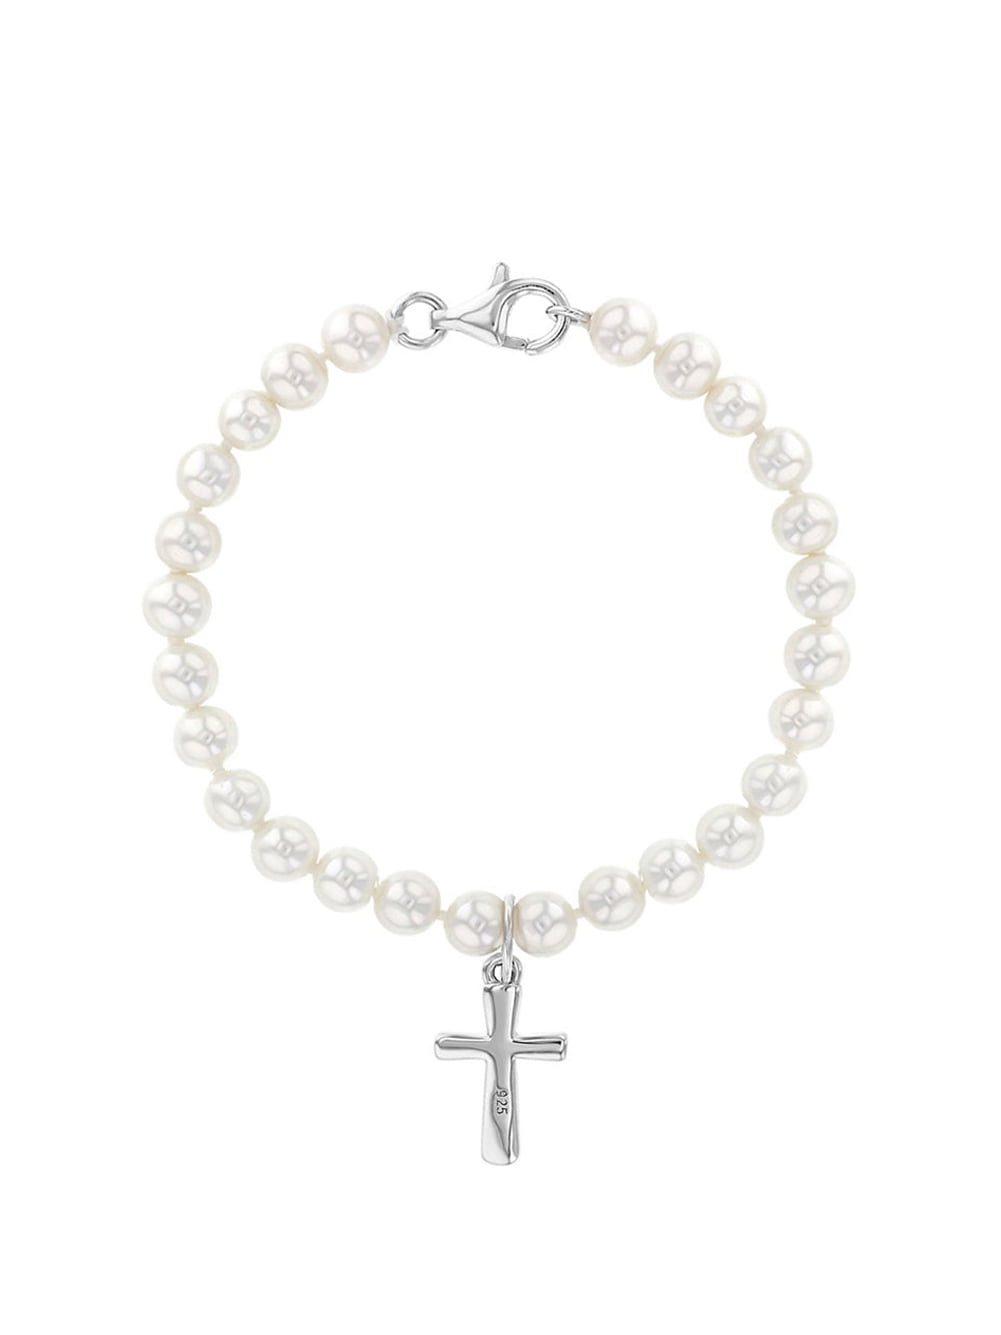 925 Sterling Silver White Simulated Pearl Baby Girl Bracelet Cross 5 